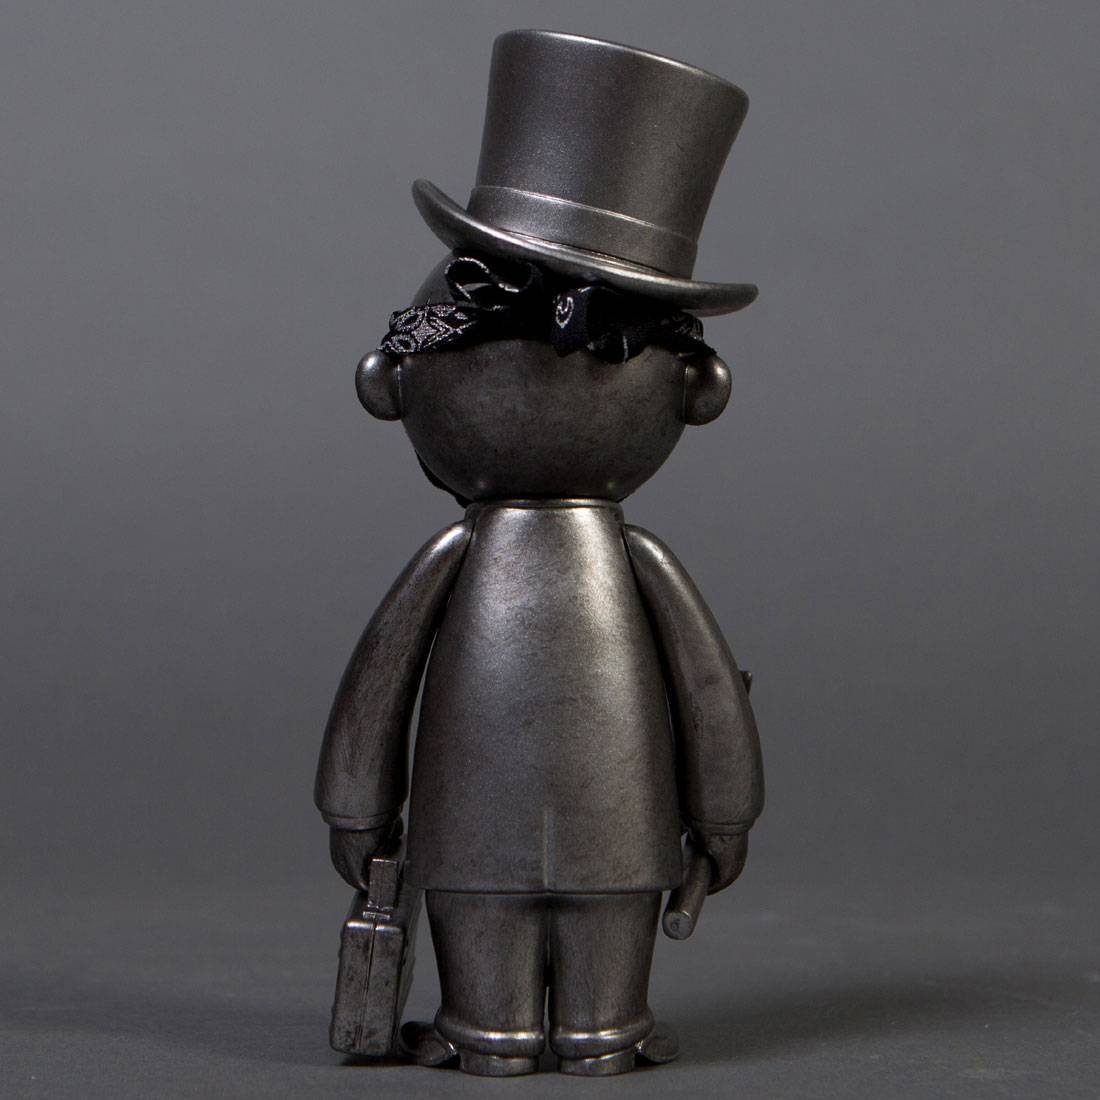 Details about   BAIT x Monopoly x Switch Collectibles Mr Pennybags 7 Inch Vinyl Figure Standar 